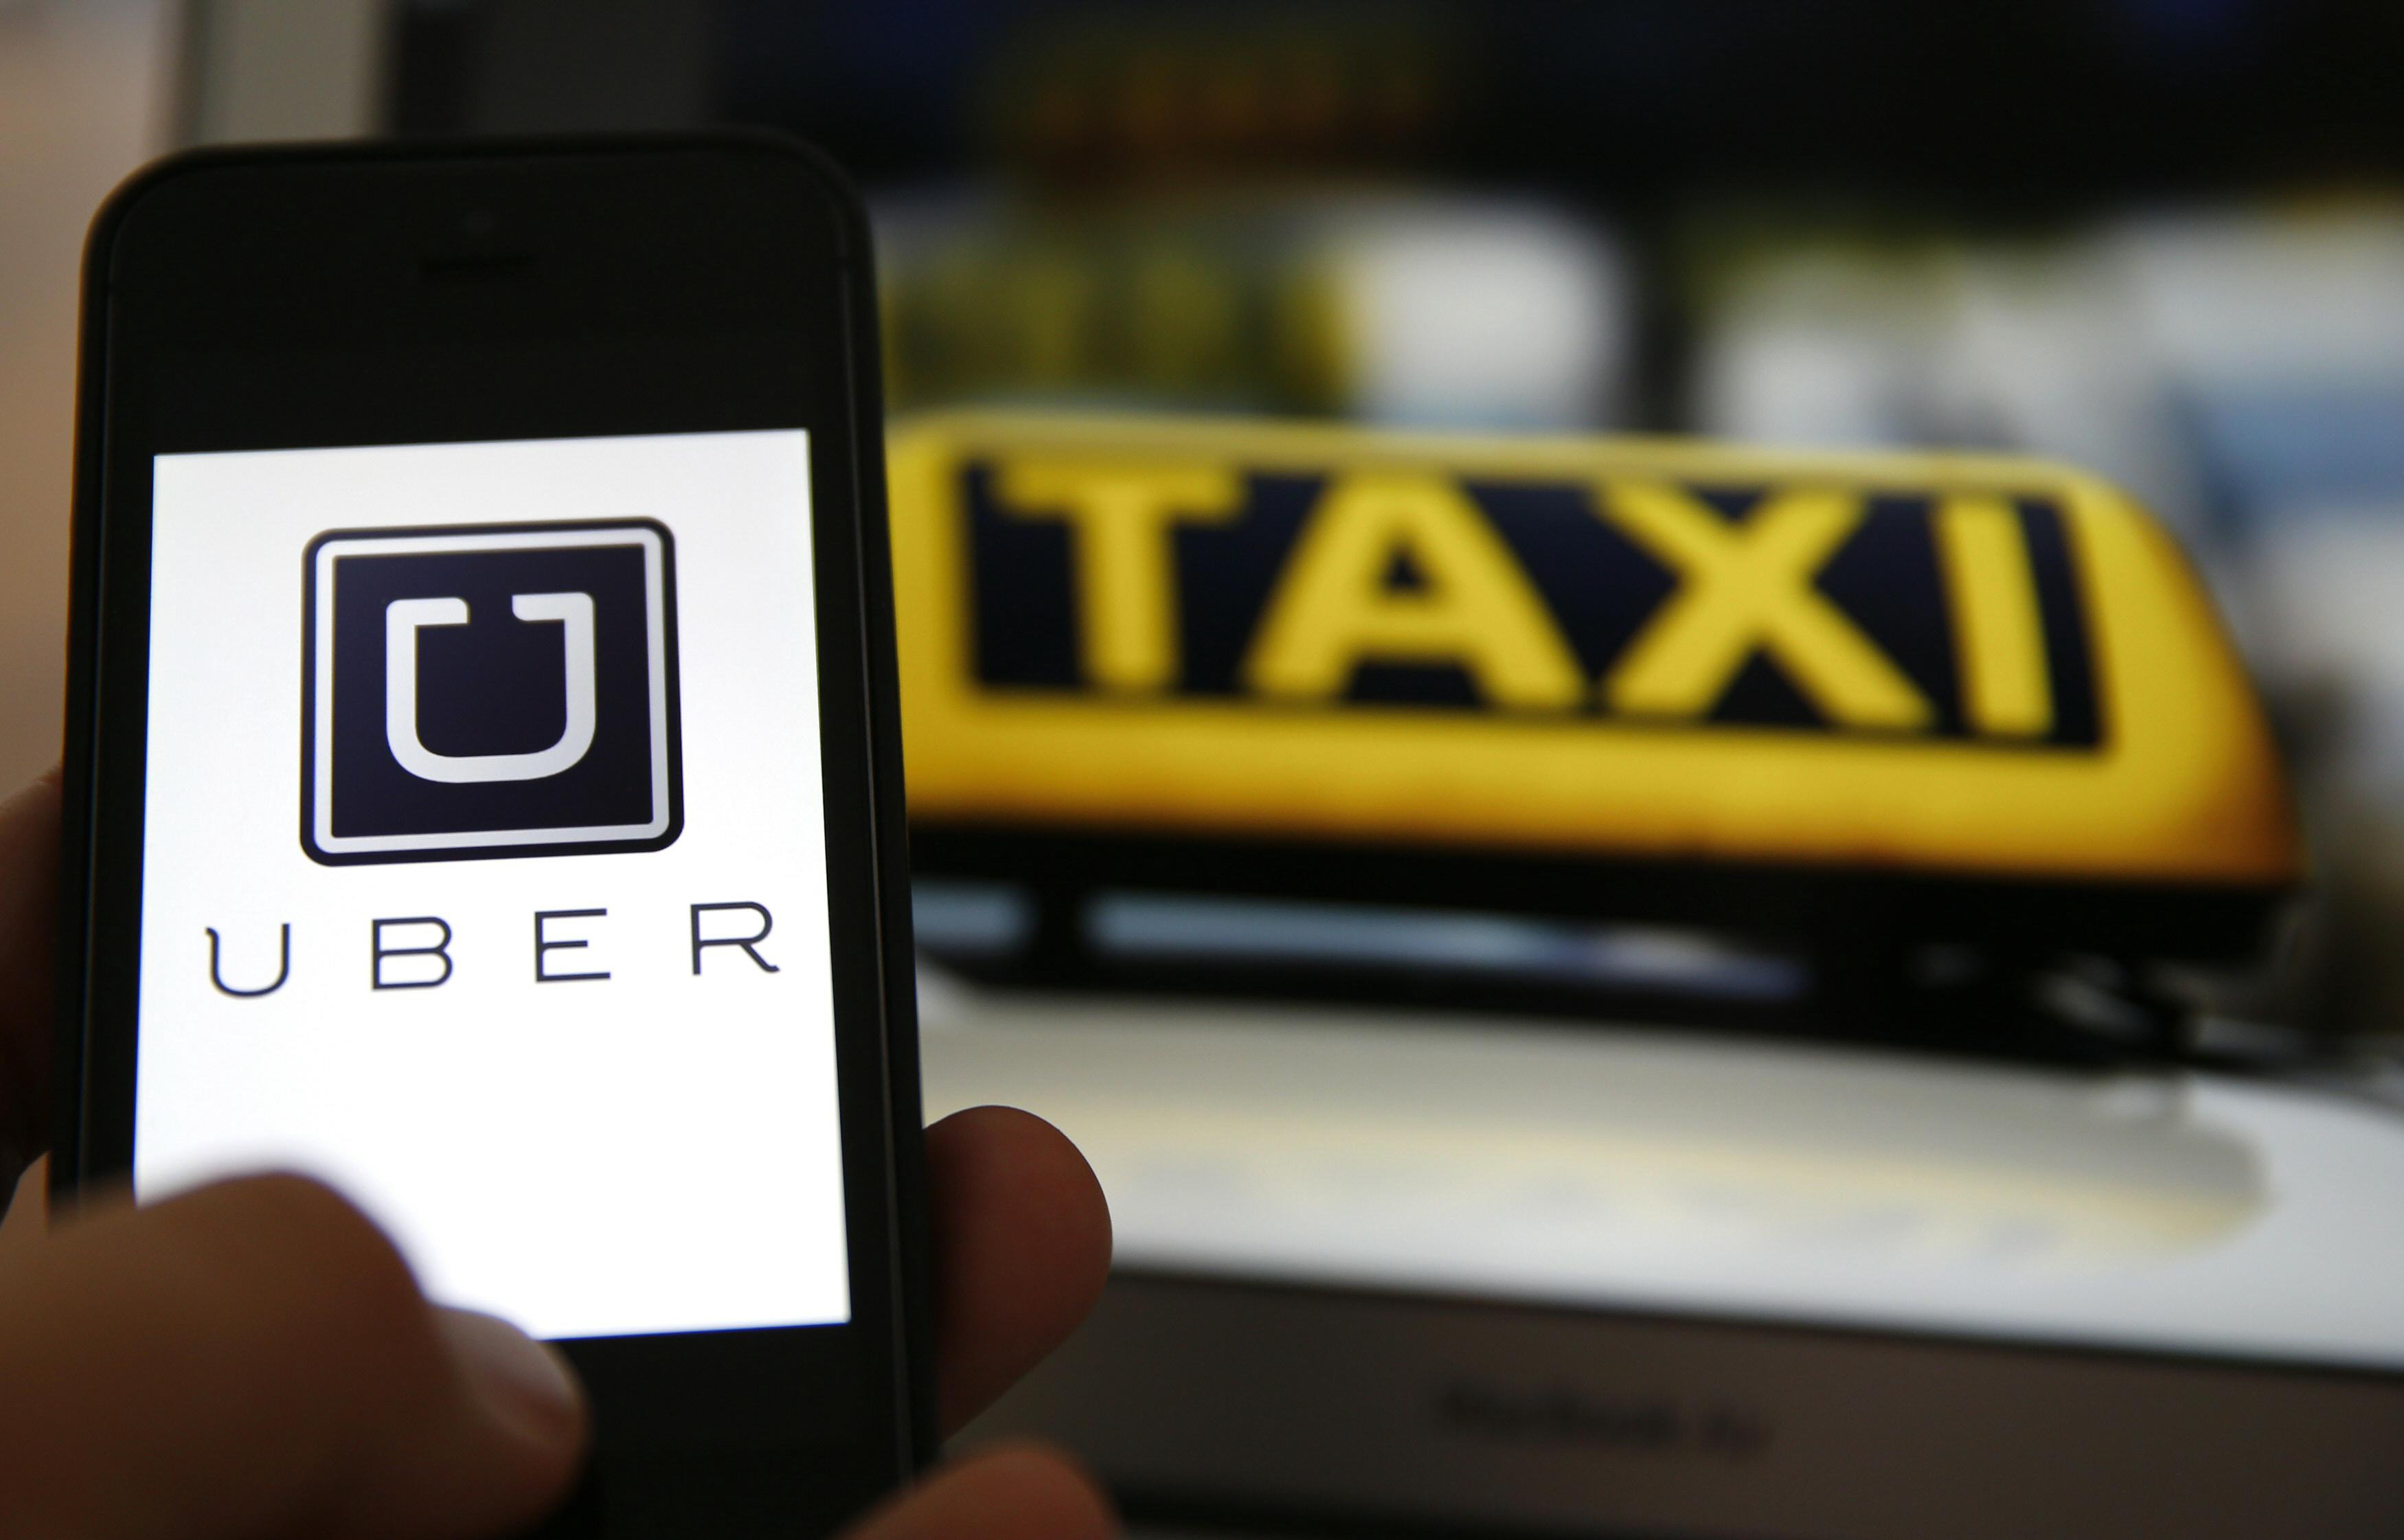 Uber is still trying to figure out if it's a real business